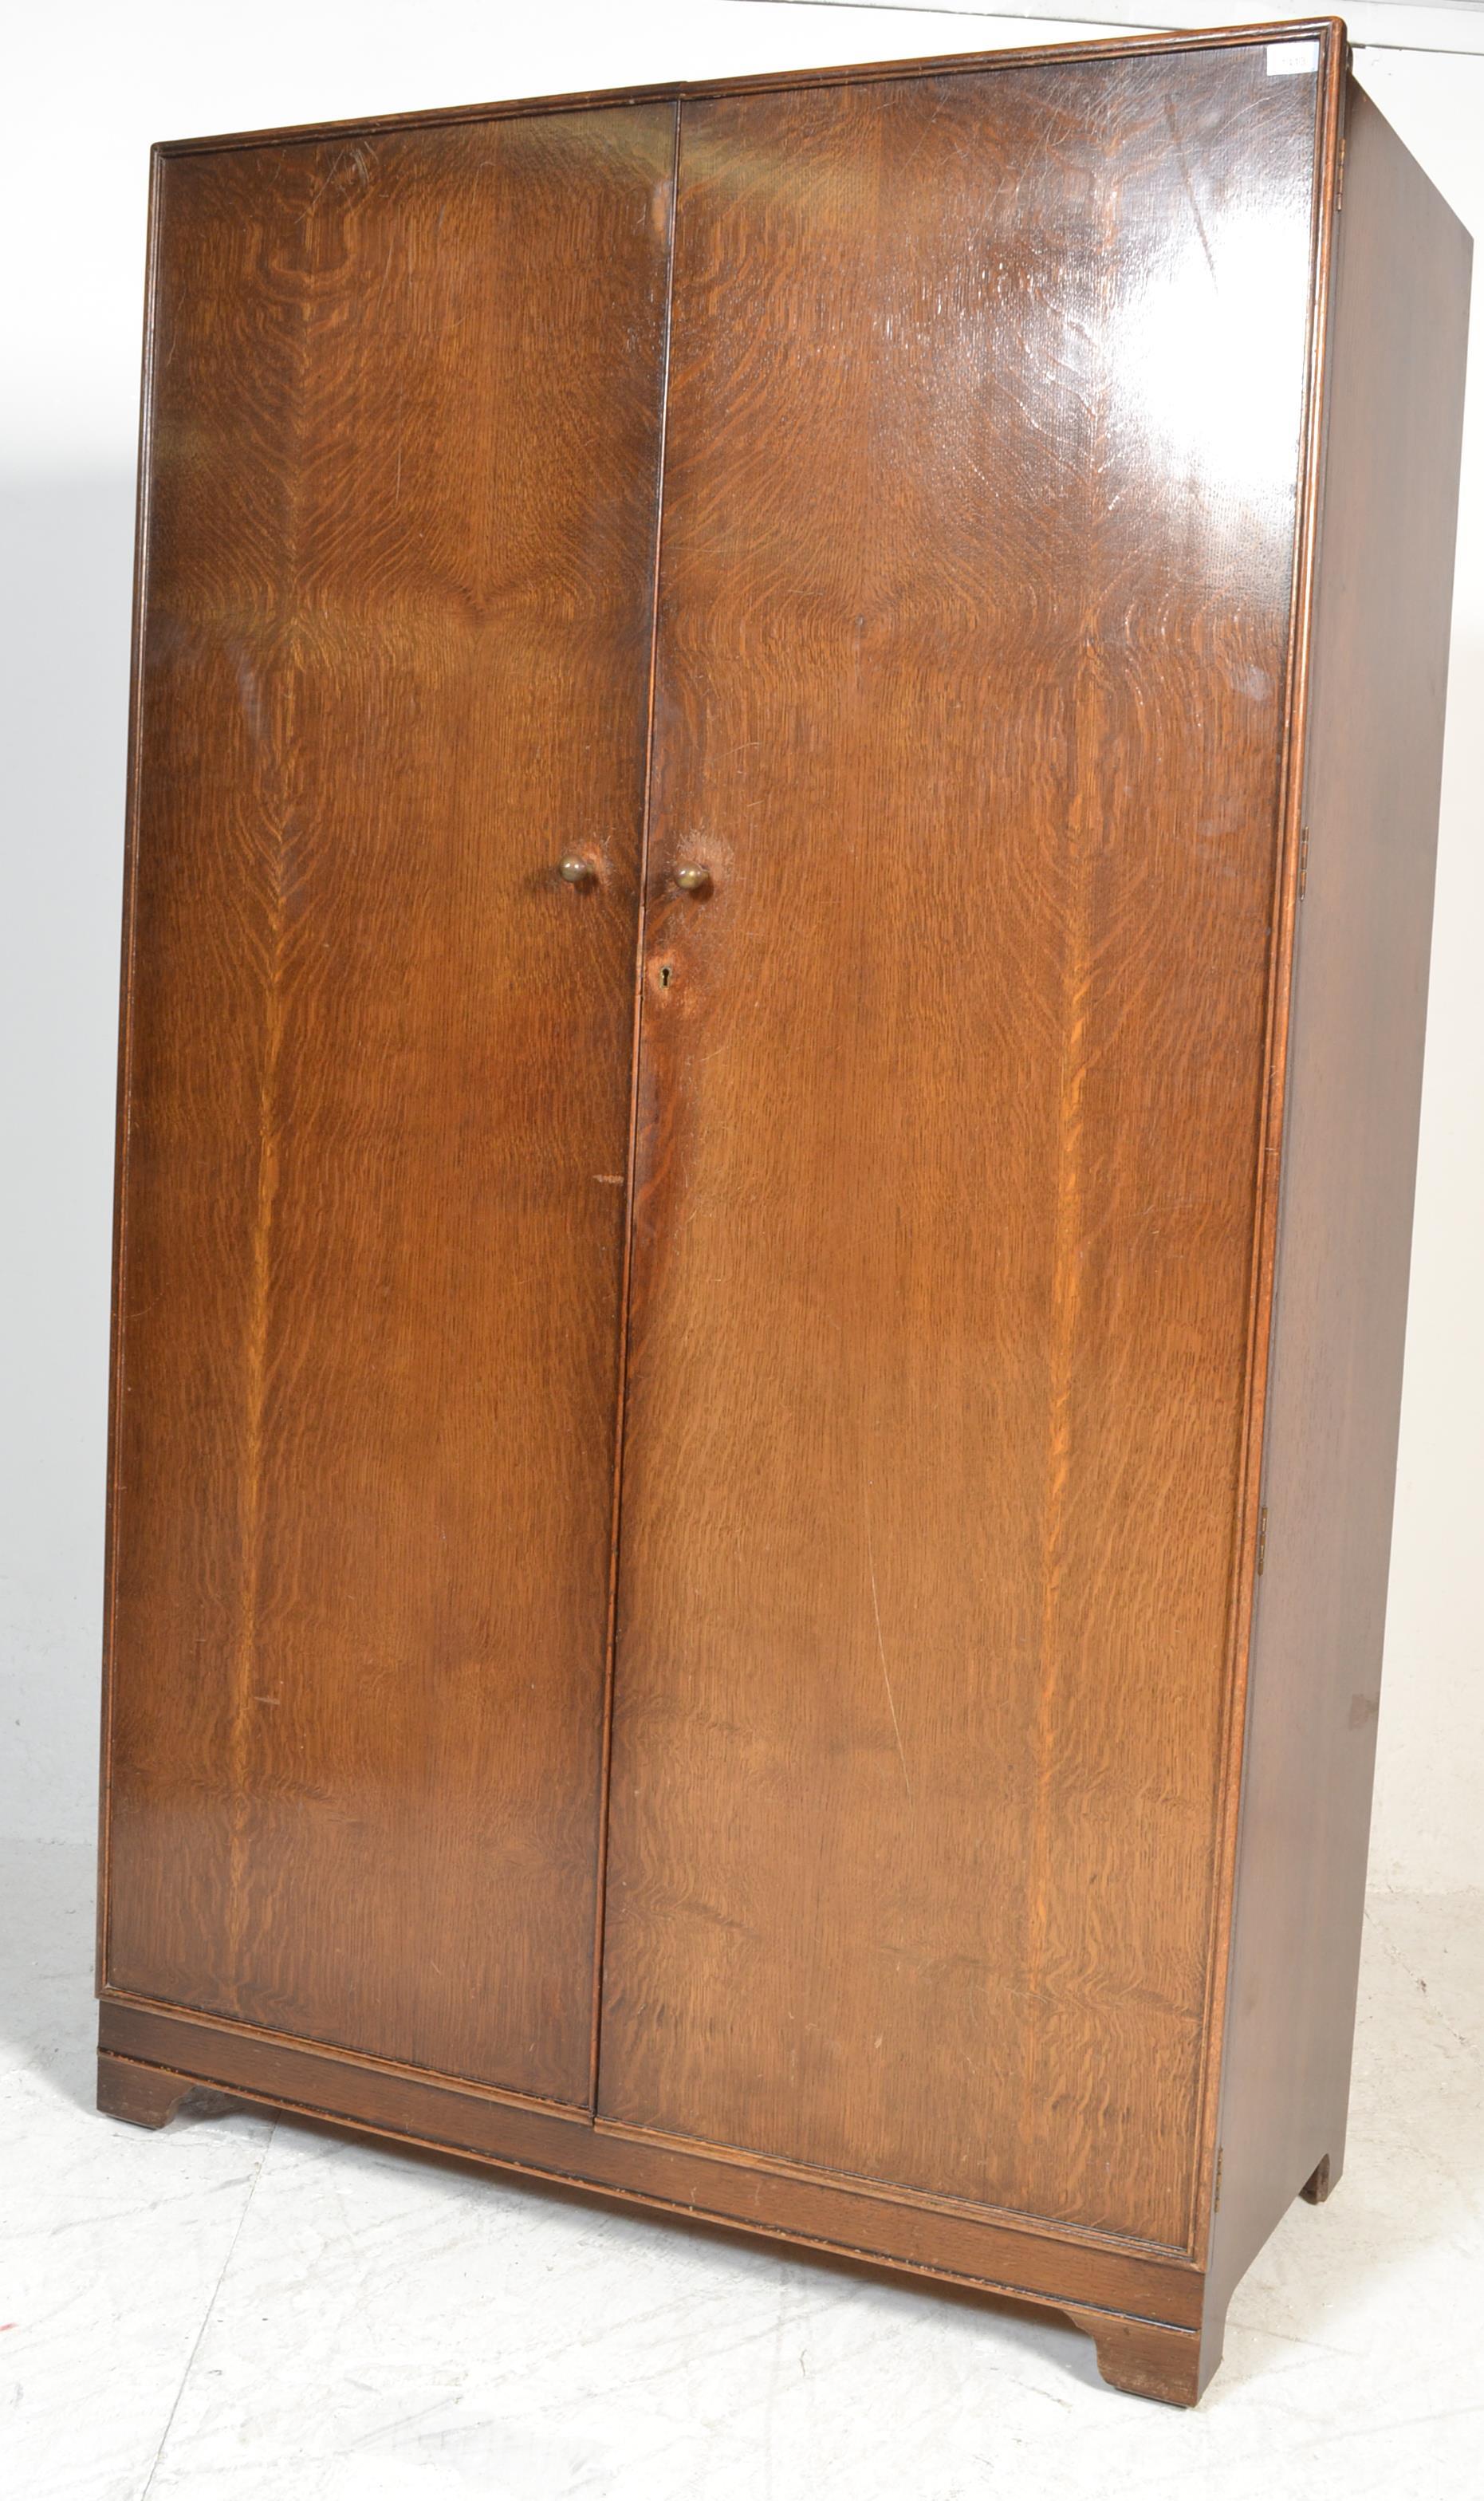 A late 19th century large mahogany ottoman chest - blanket box with fielded panels to the front, - Image 5 of 8